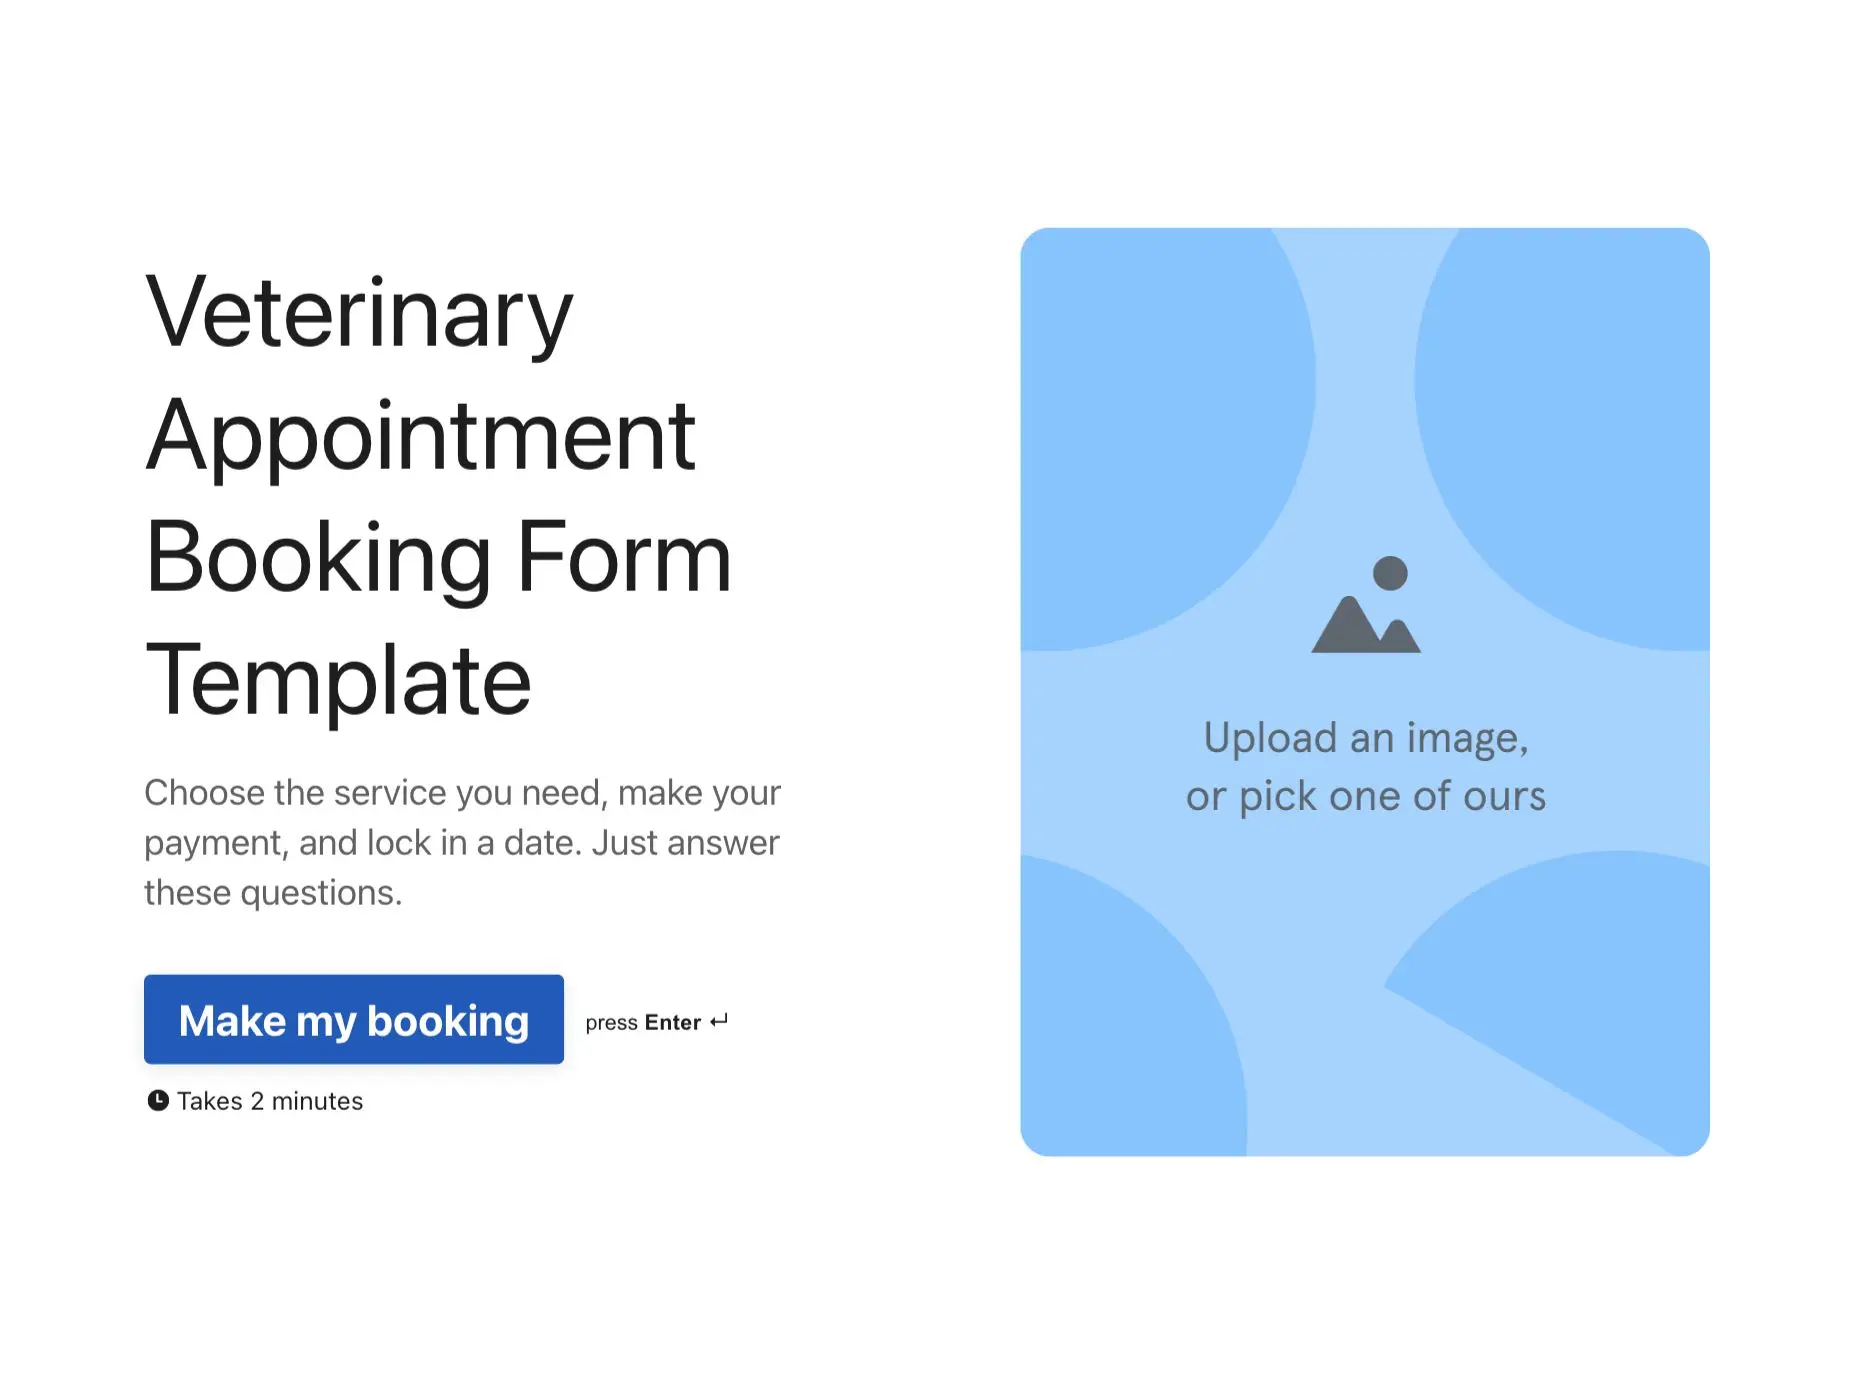 Veterinary Appointment Booking Form Template Hero